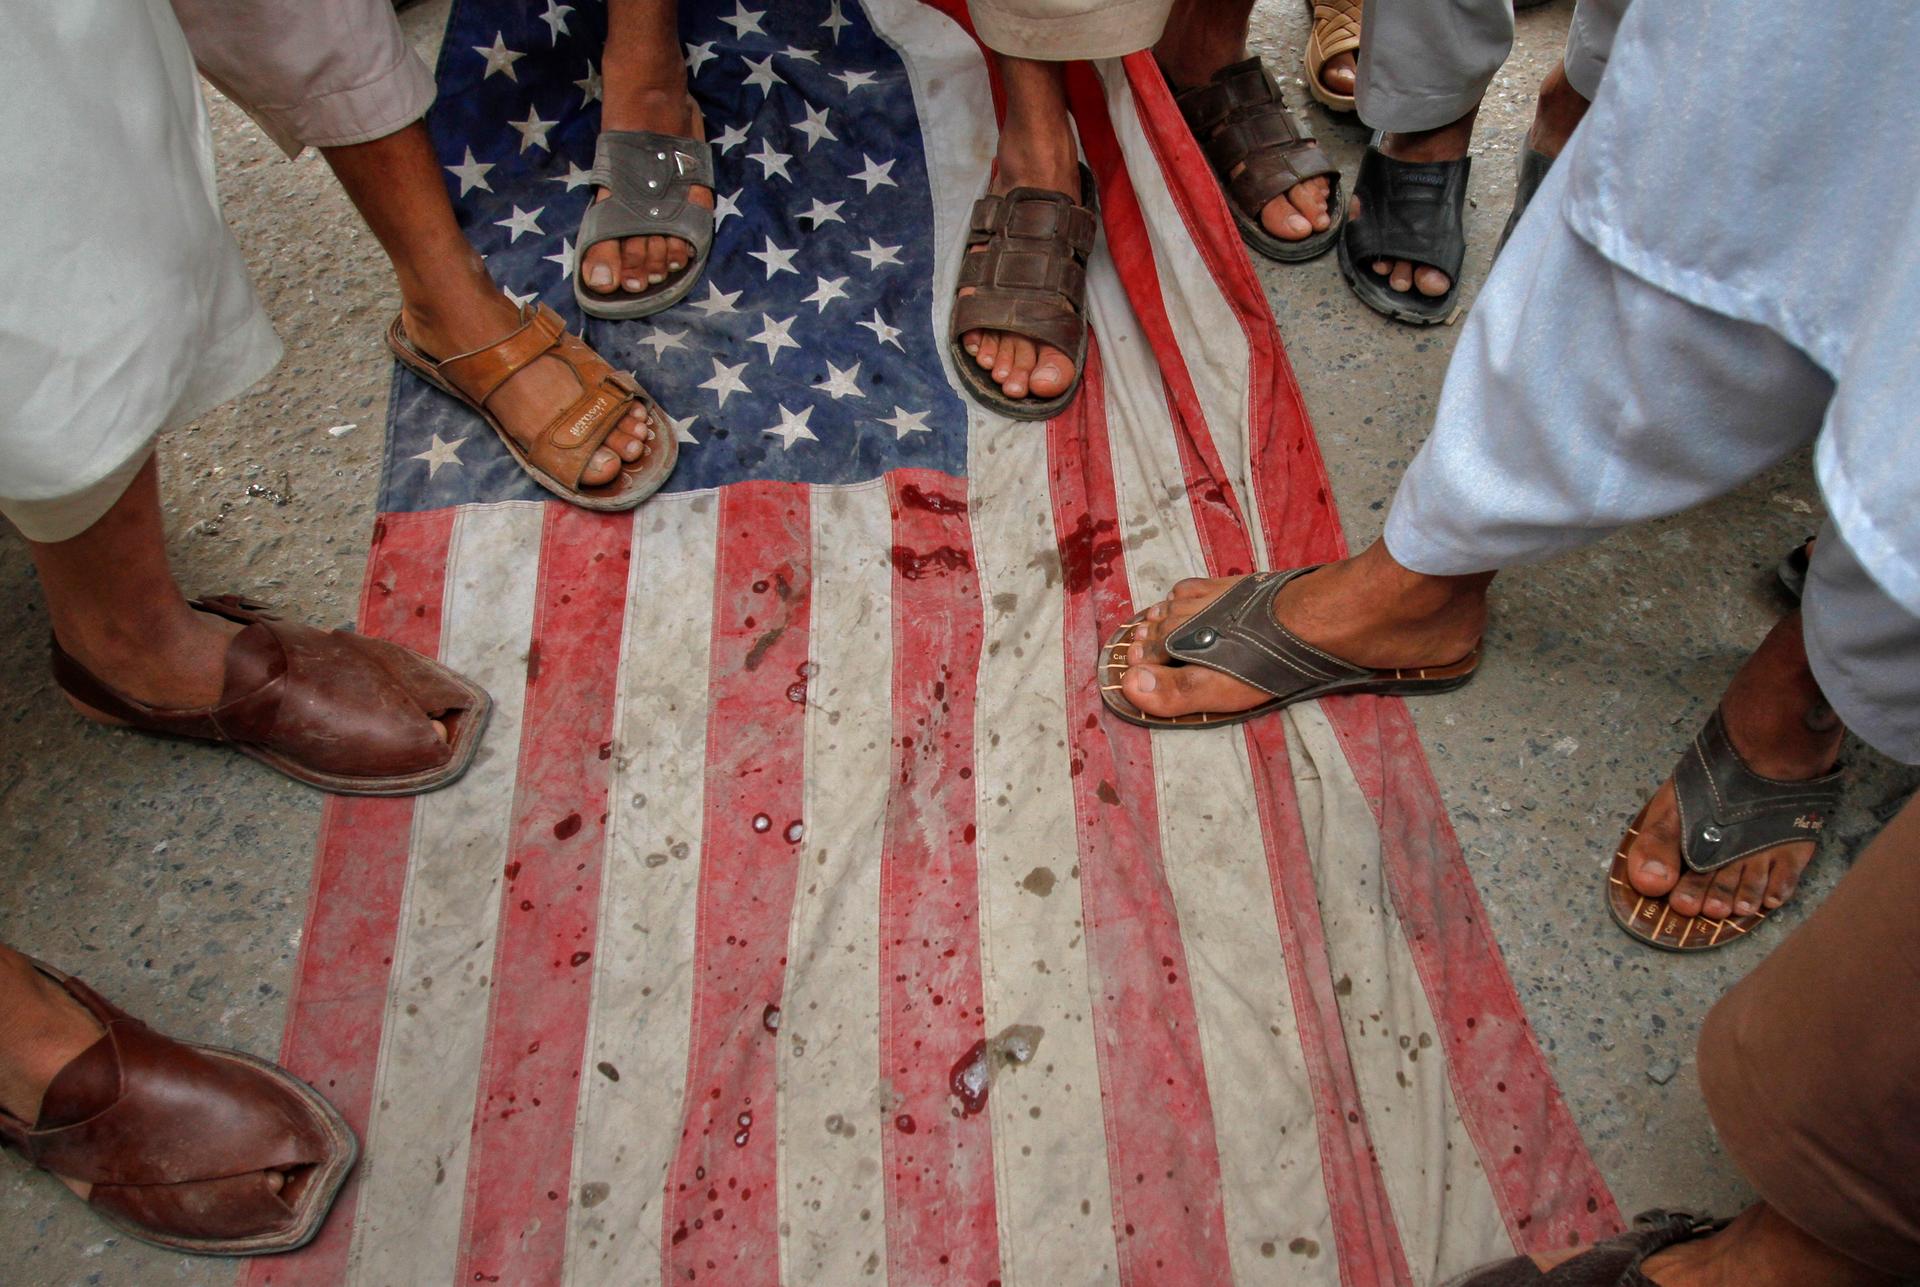 Men step on a U.S flag during an anti-American rally in Peshawar, Pakistan in April of last year.